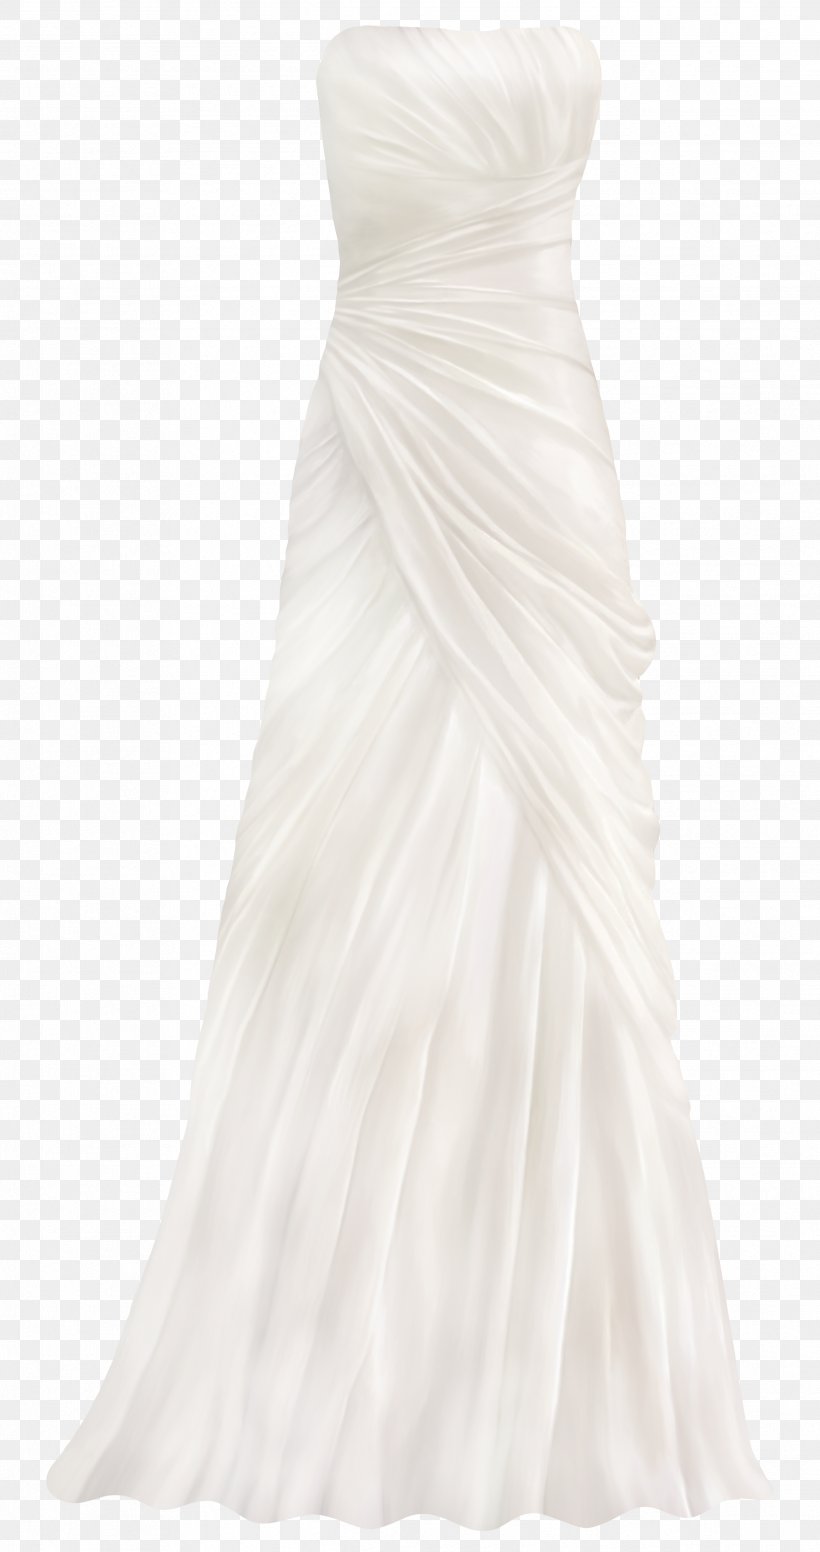 Wedding Dress Clothing Gown Bridesmaid, PNG, 2482x4700px, Dress, Bridal Accessory, Bridal Clothing, Bridal Party Dress, Bride Download Free